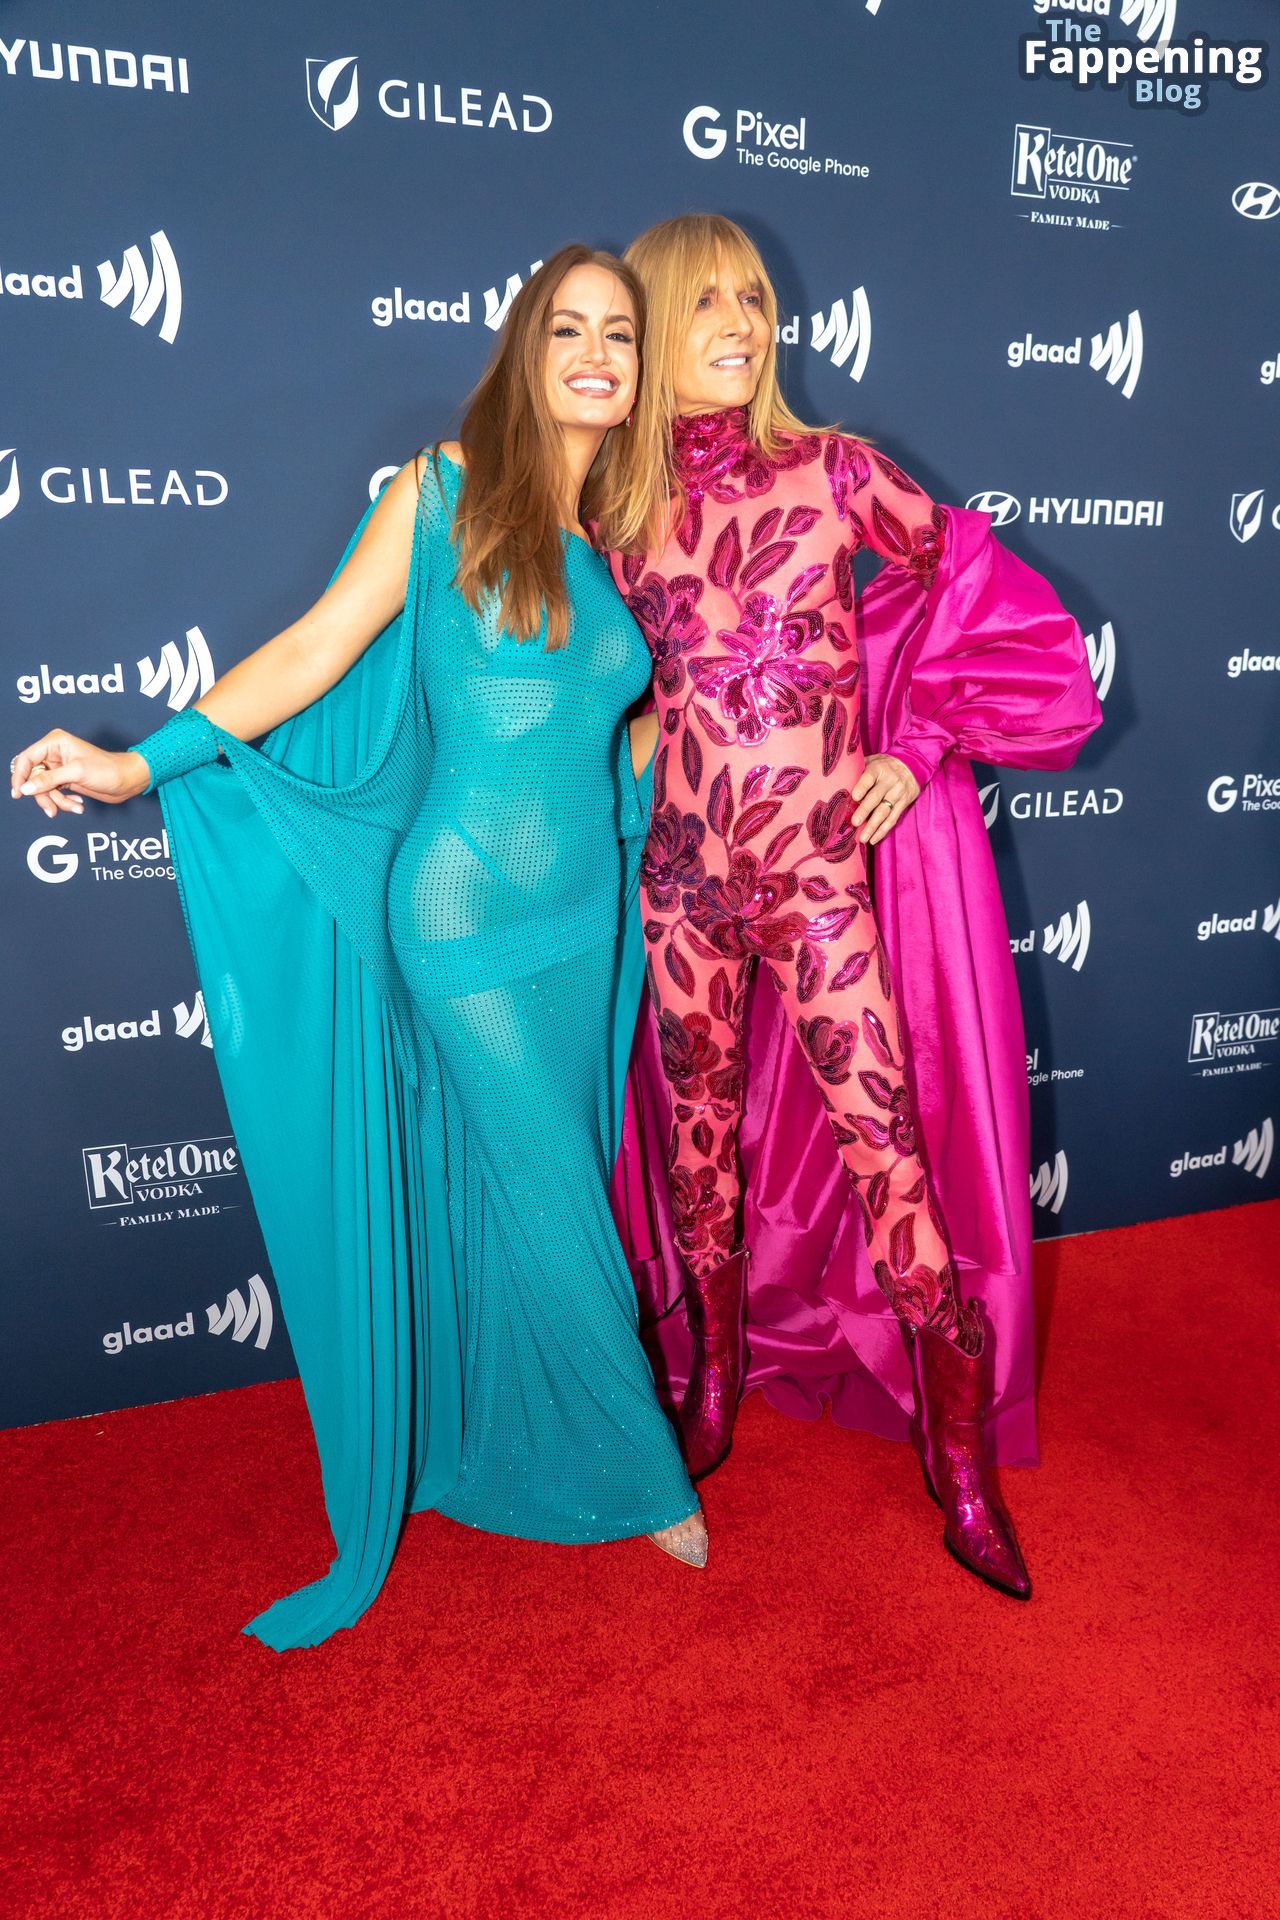 Haley Kalil Displays Her Sexy Figure in See-Through Dress at the 34th Annual GLAAD Media Awards in NYC (15 Photos)